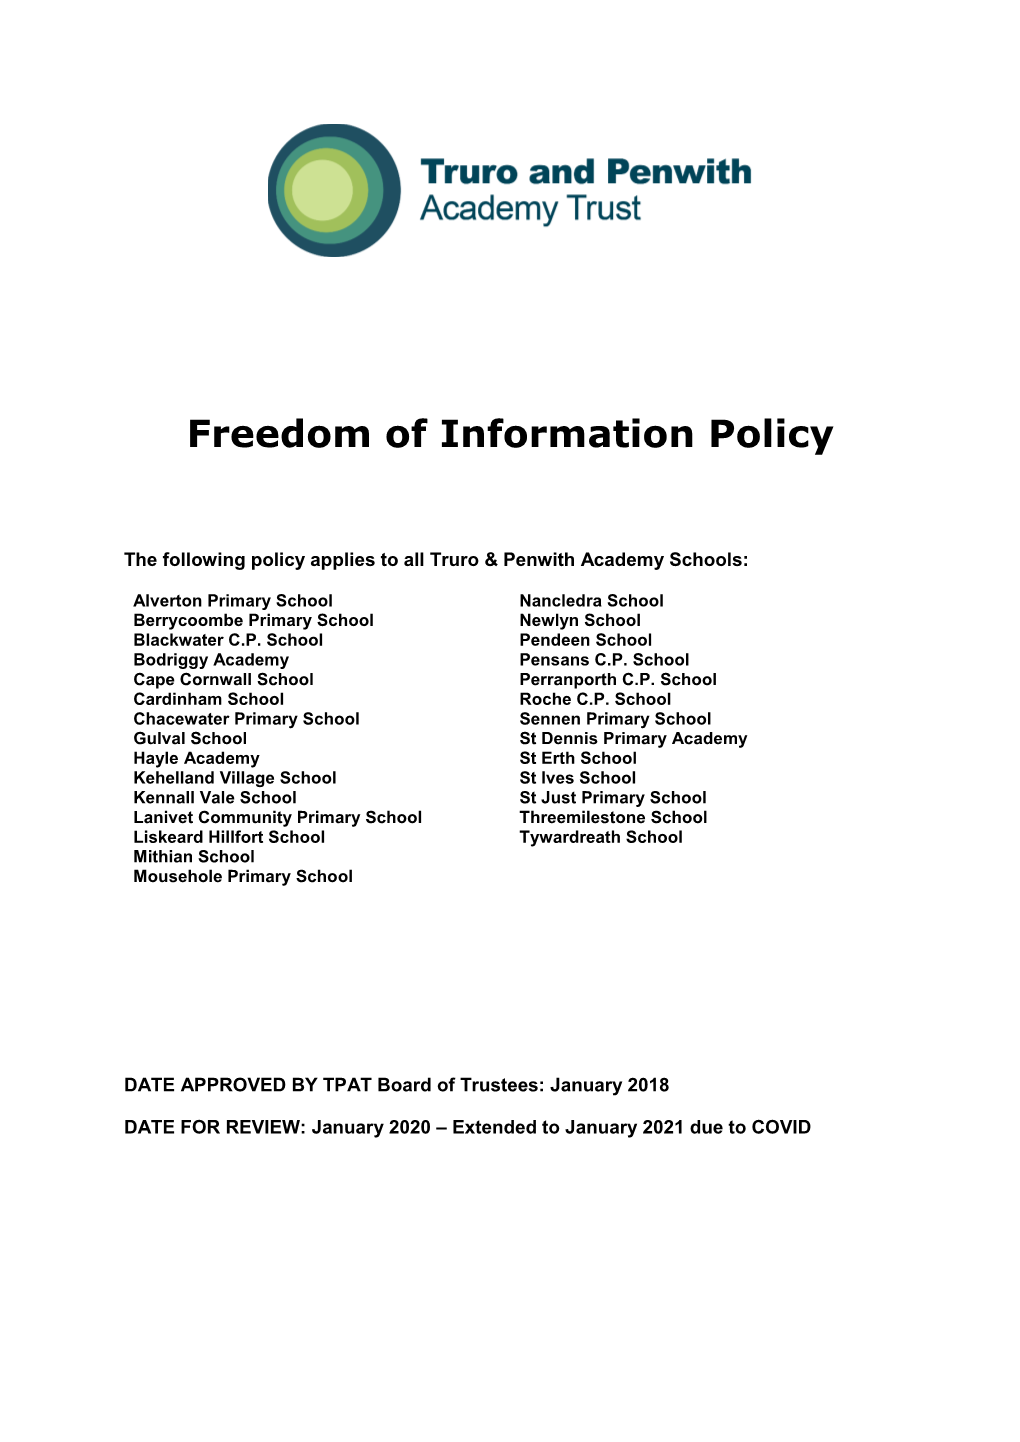 Freedom of Information Policy